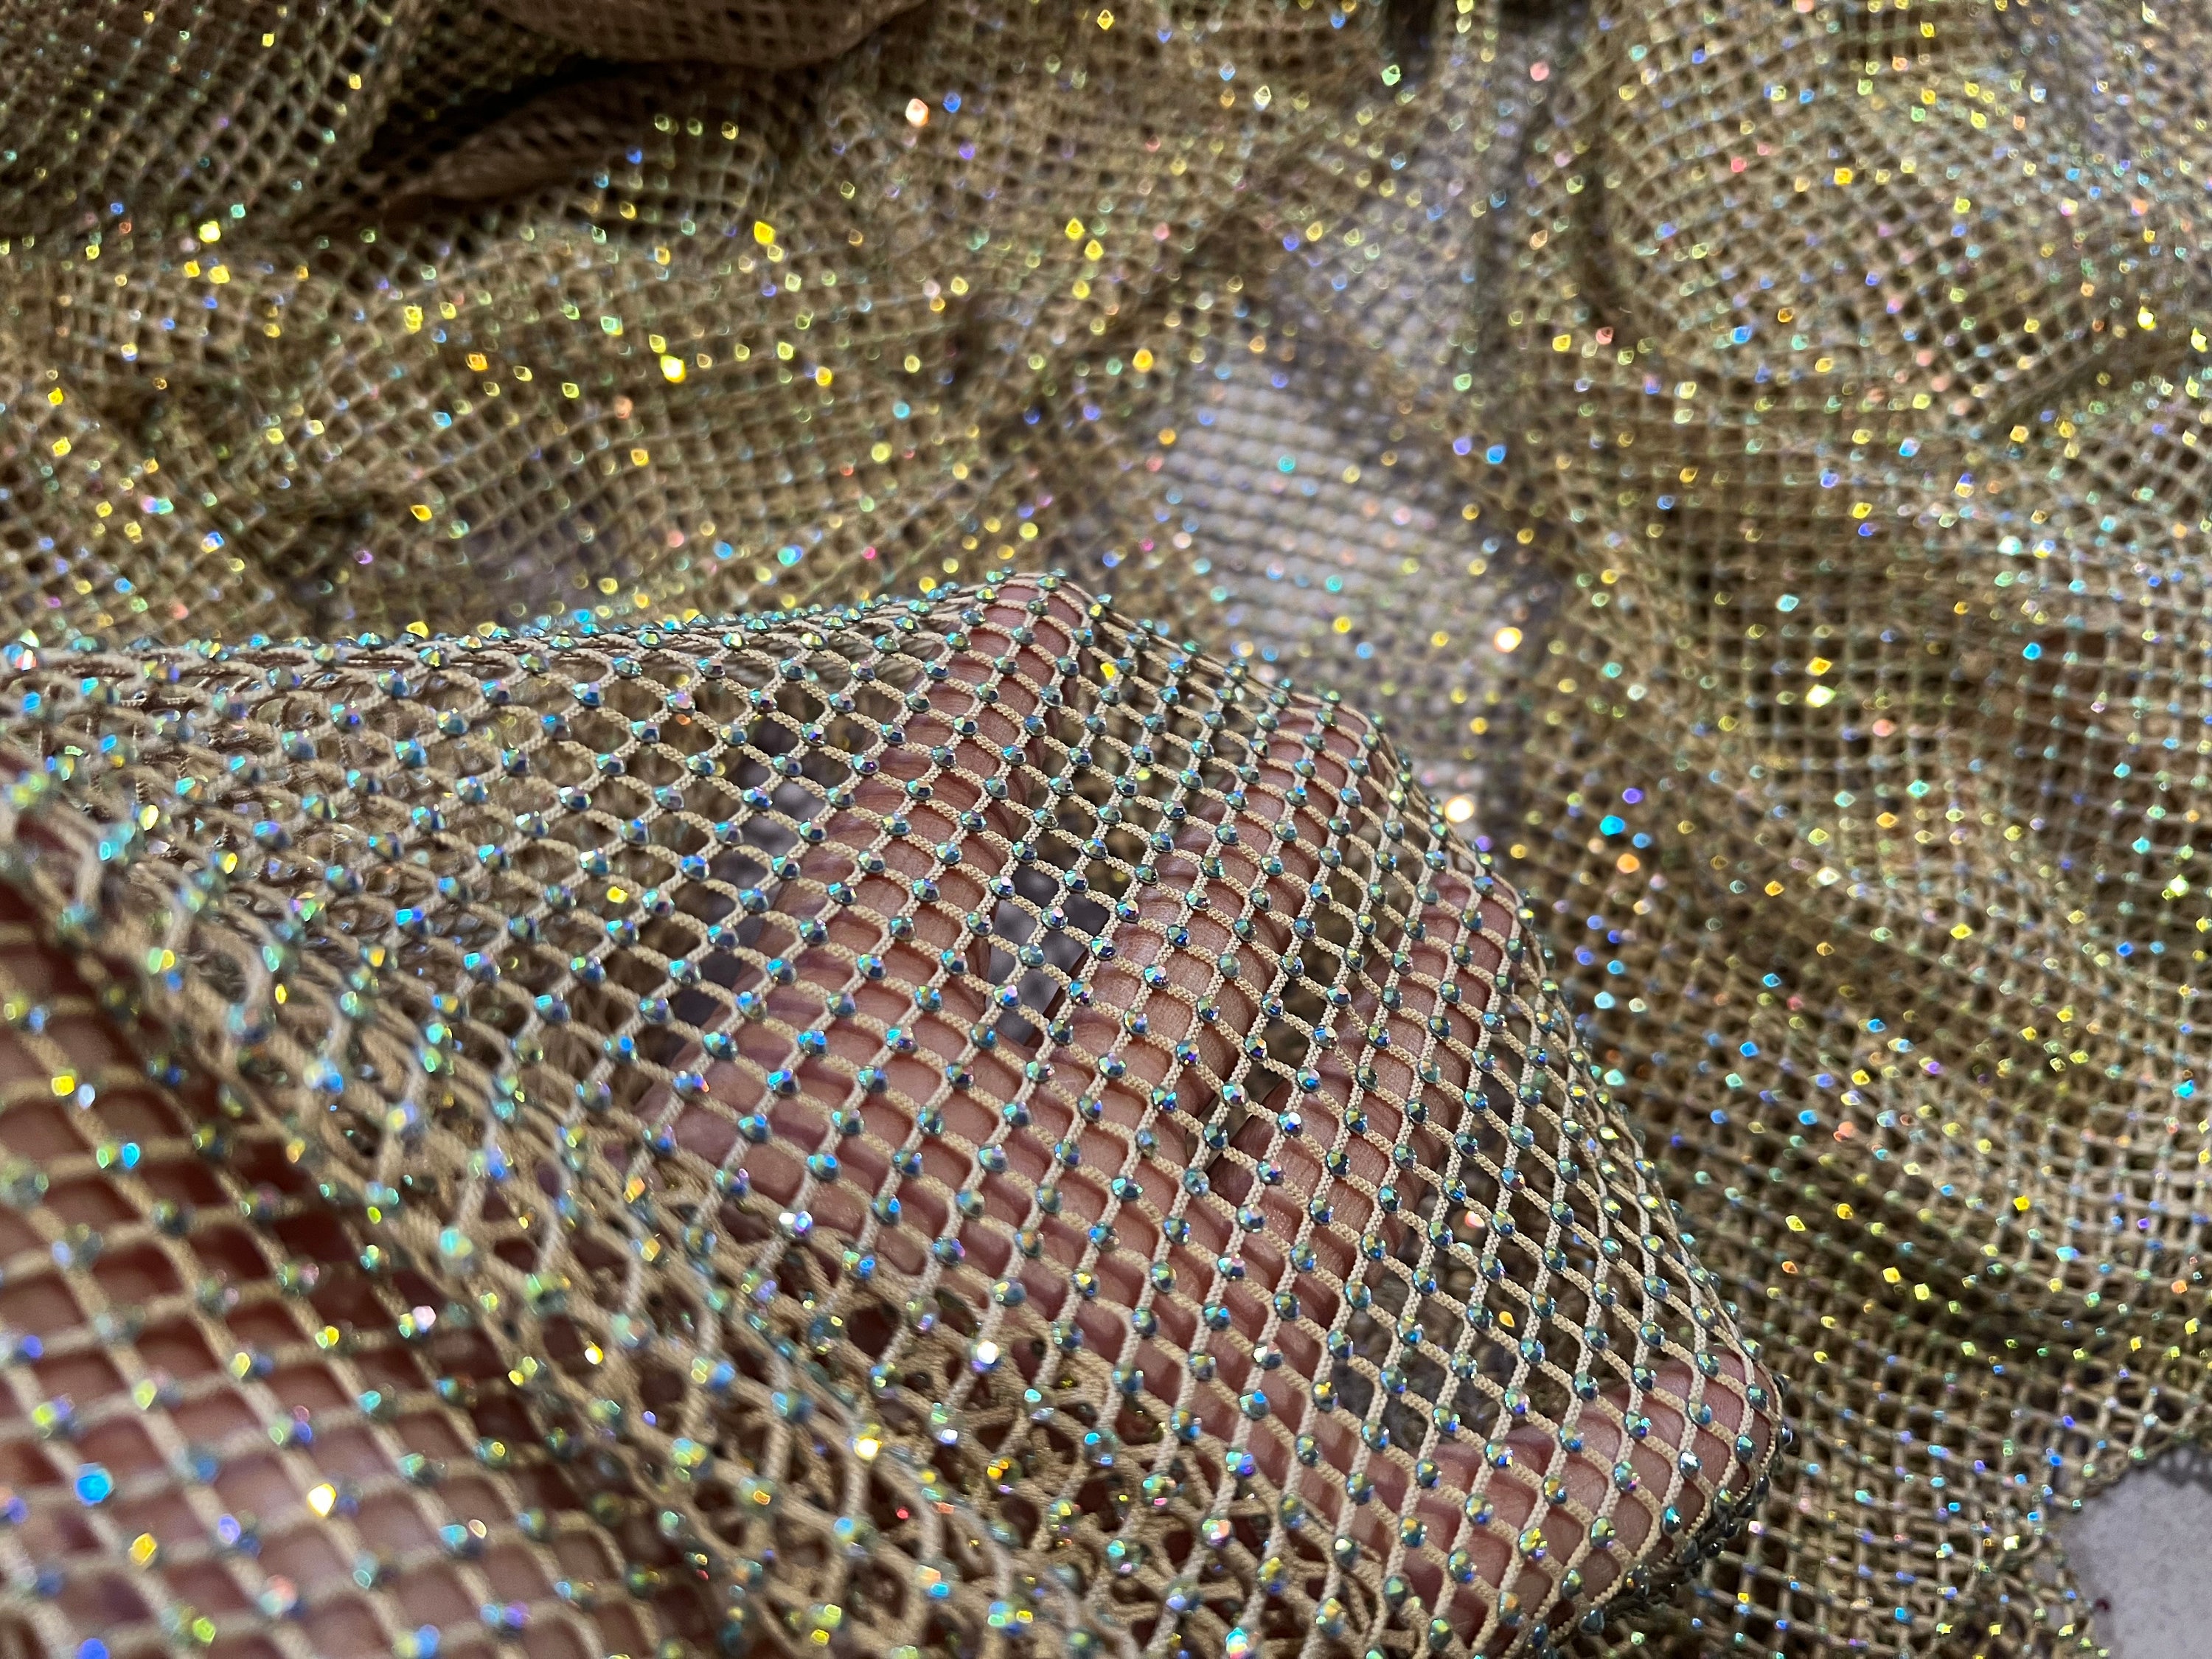 Red Rhinestone Fabric On Red Stretch Net Fabric, Spandex Fish Net with  Crystal Stones sold by the yard